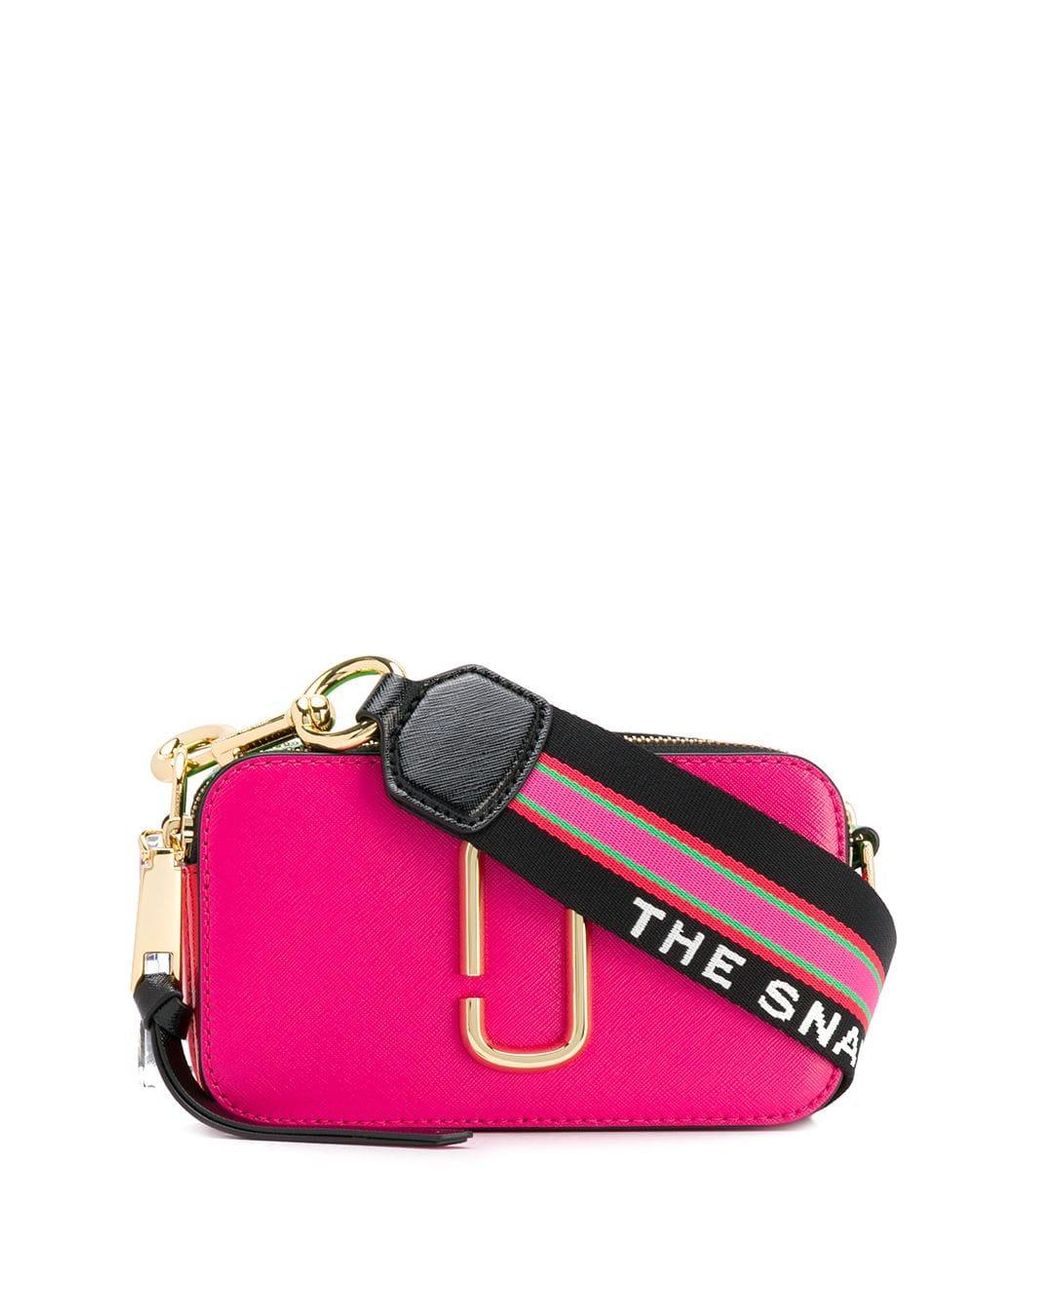 Marc Jacobs Leather Snapshot Camera Bag in Pink - Lyst